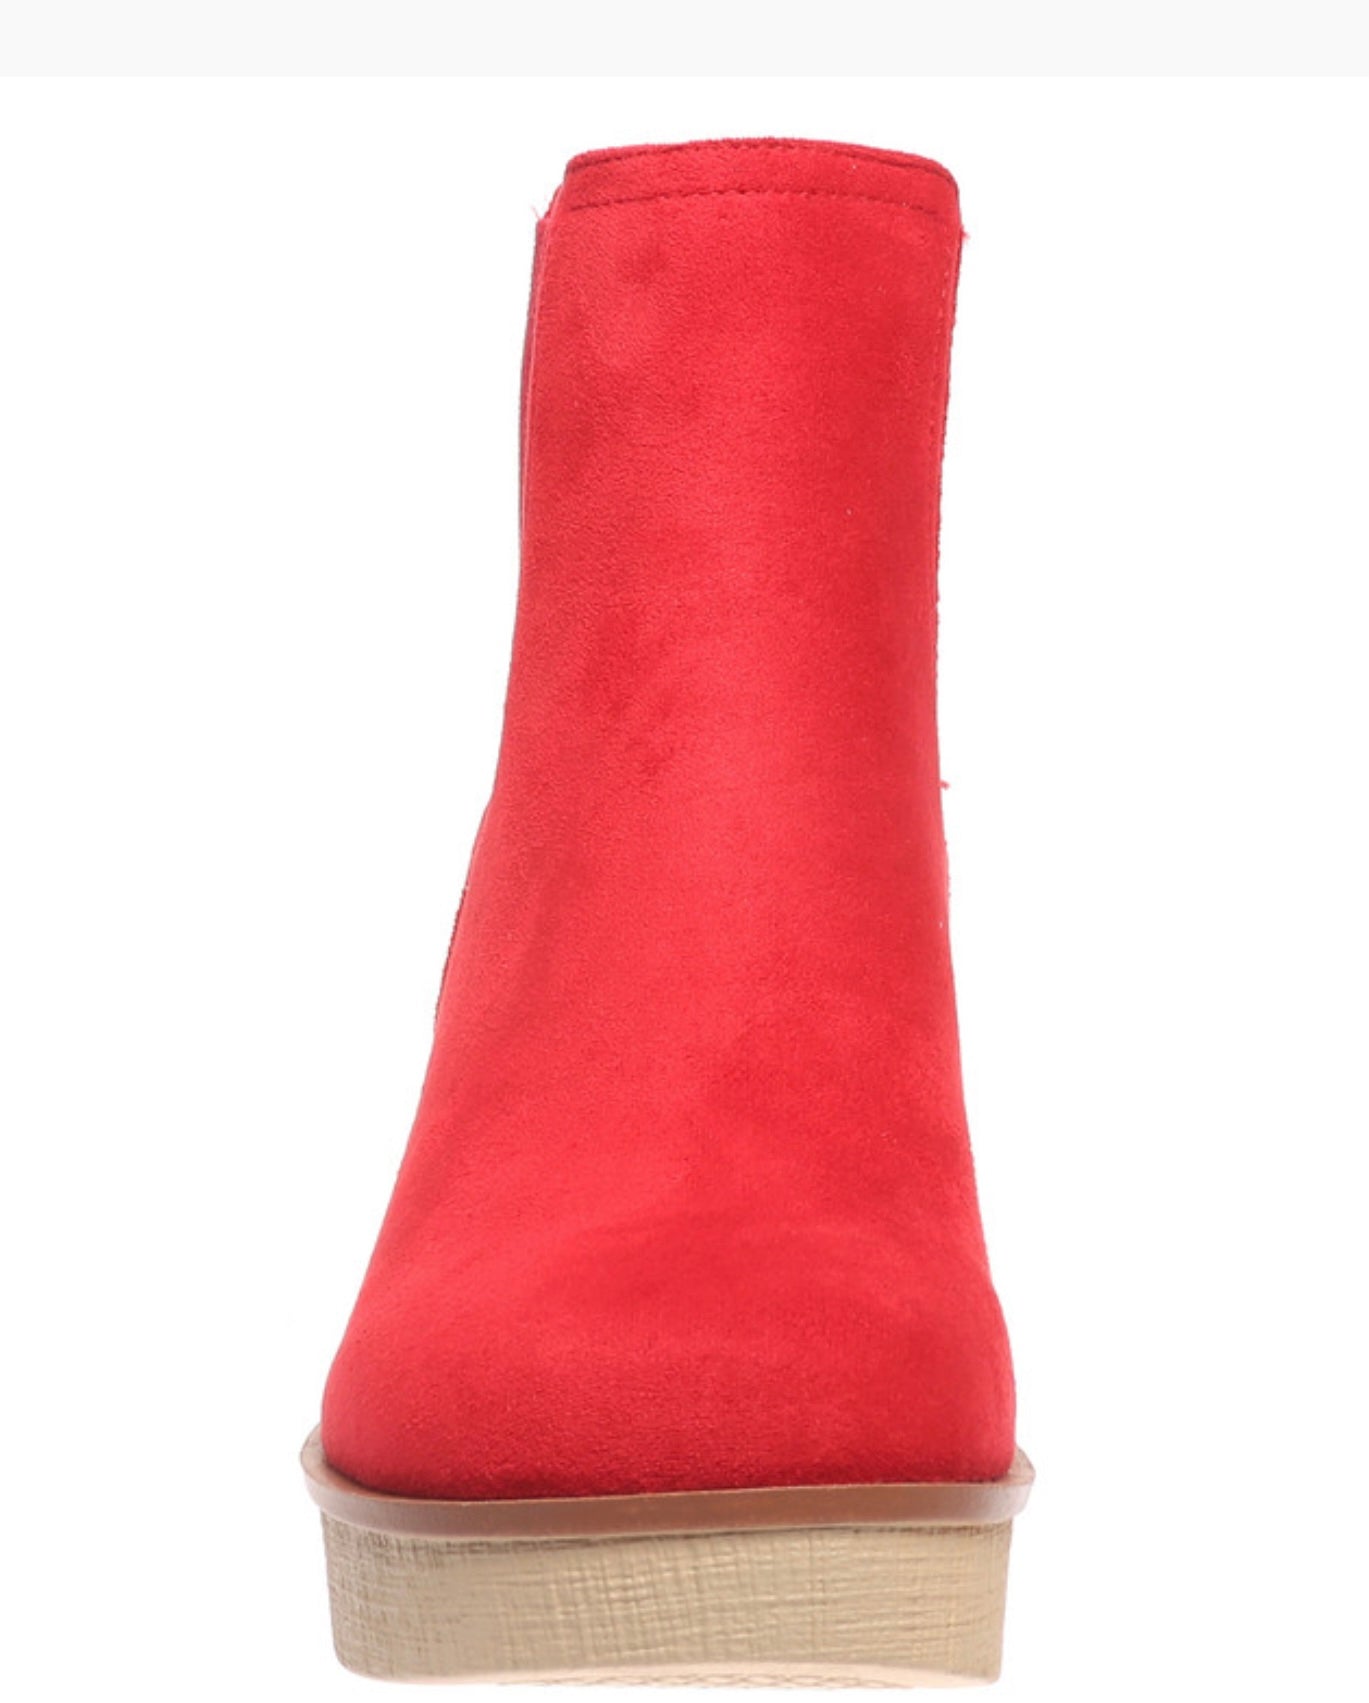 Clue Boot- Red